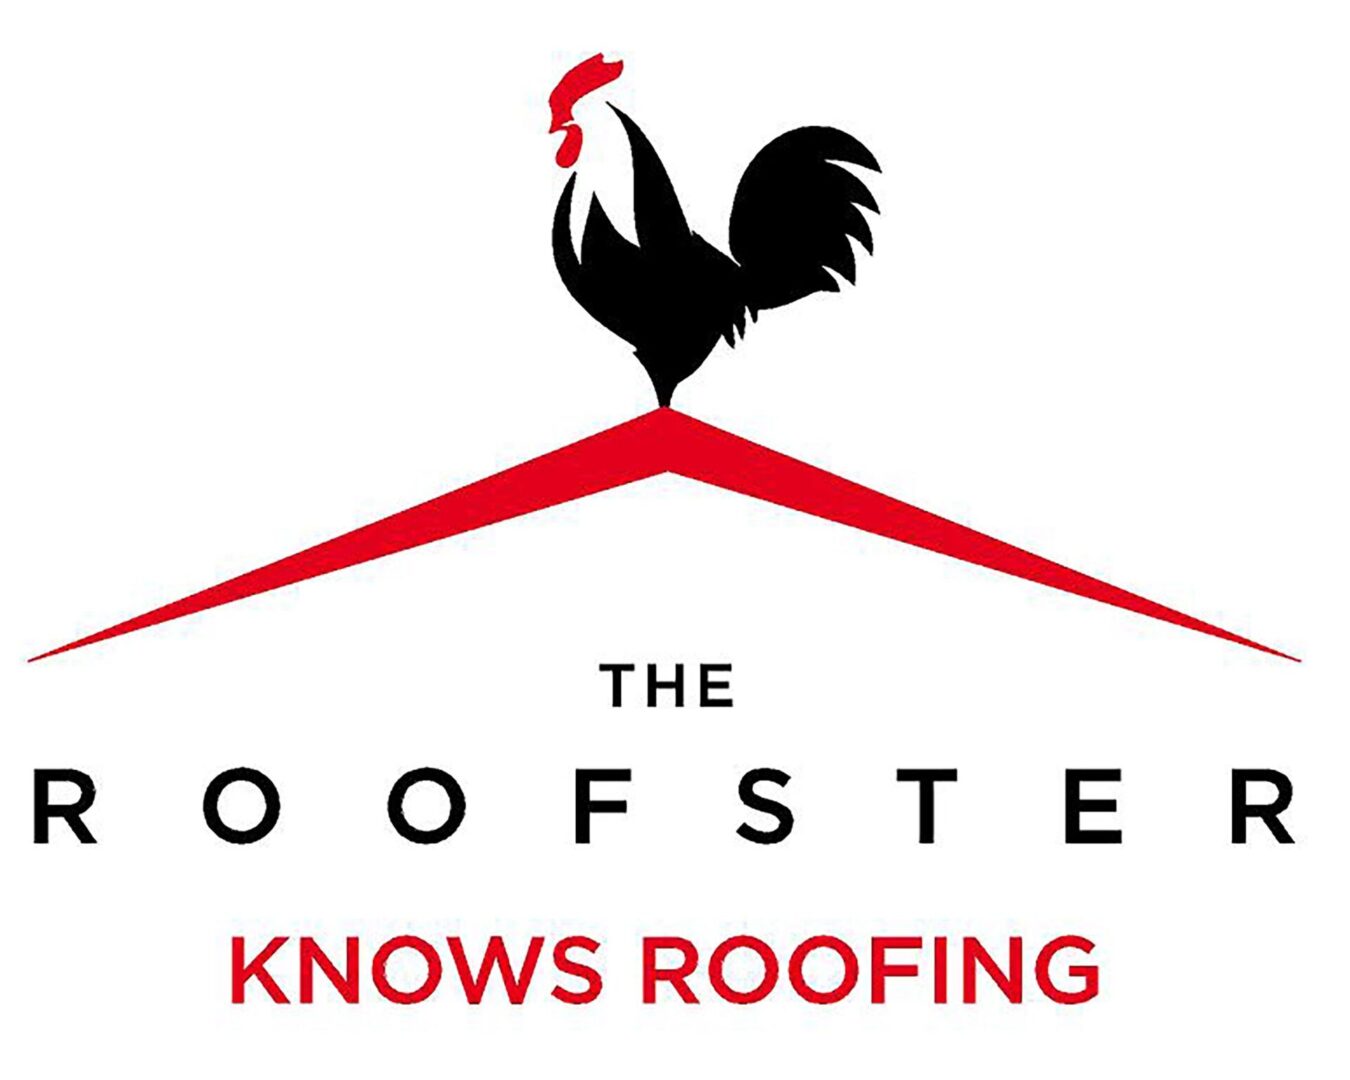 The roofste knows roofing